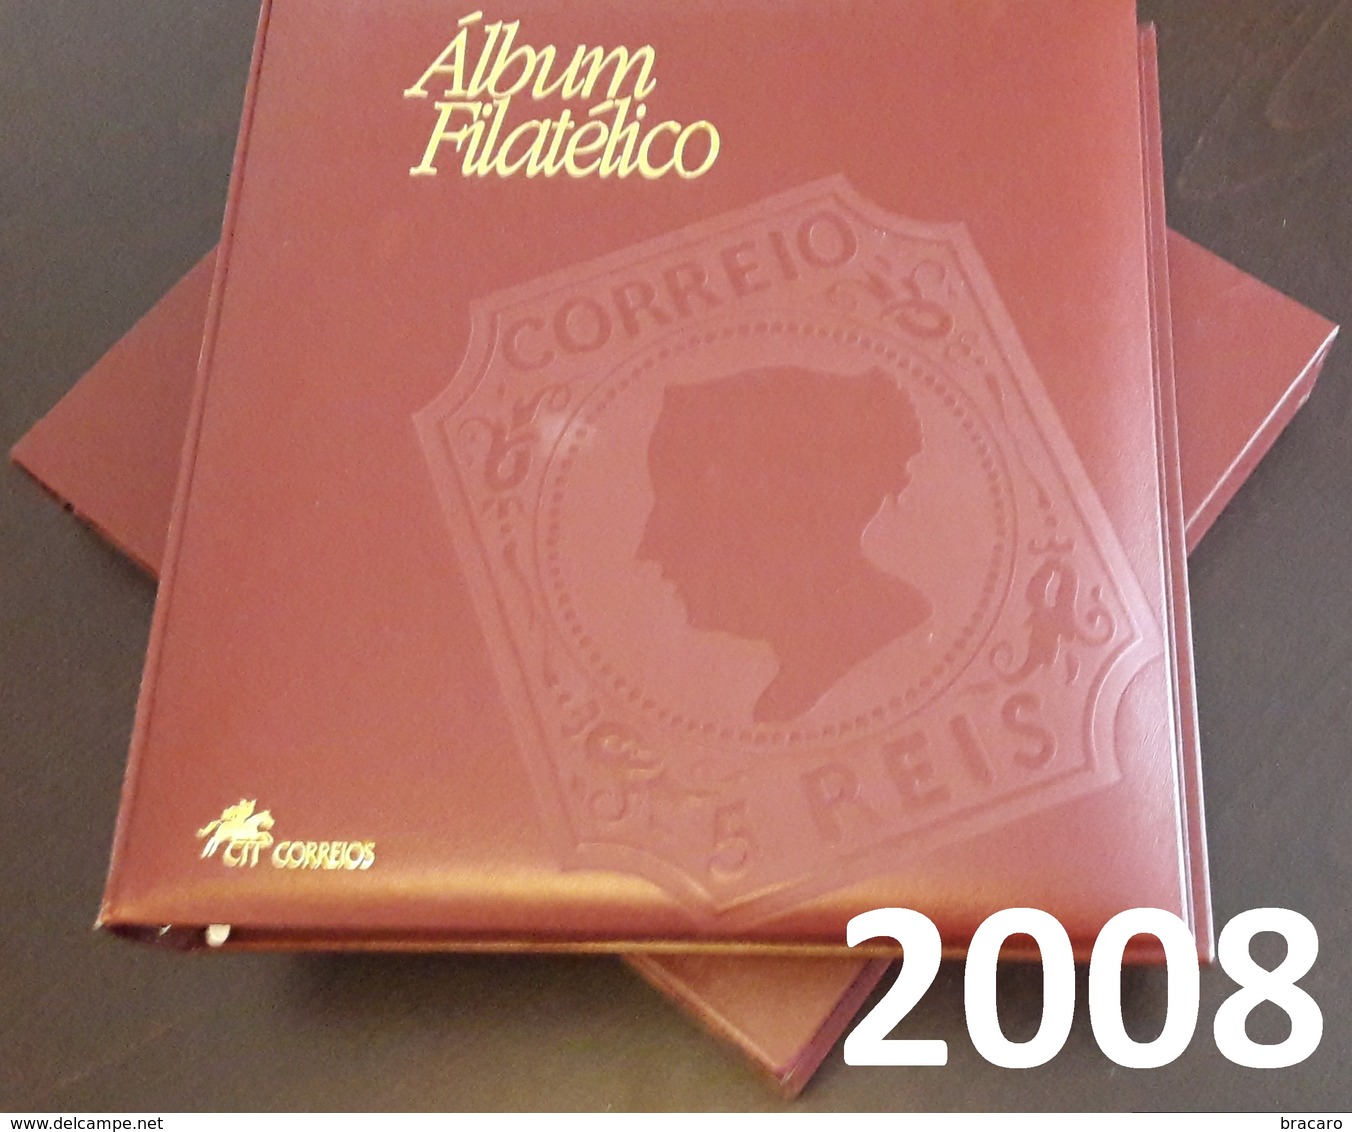 PORTUGAL - ÁLBUM FILATÉLICO - Full Year Stamps + Blocks + ATM / Machine Stamps - MNH - 2008 - Book Of The Year